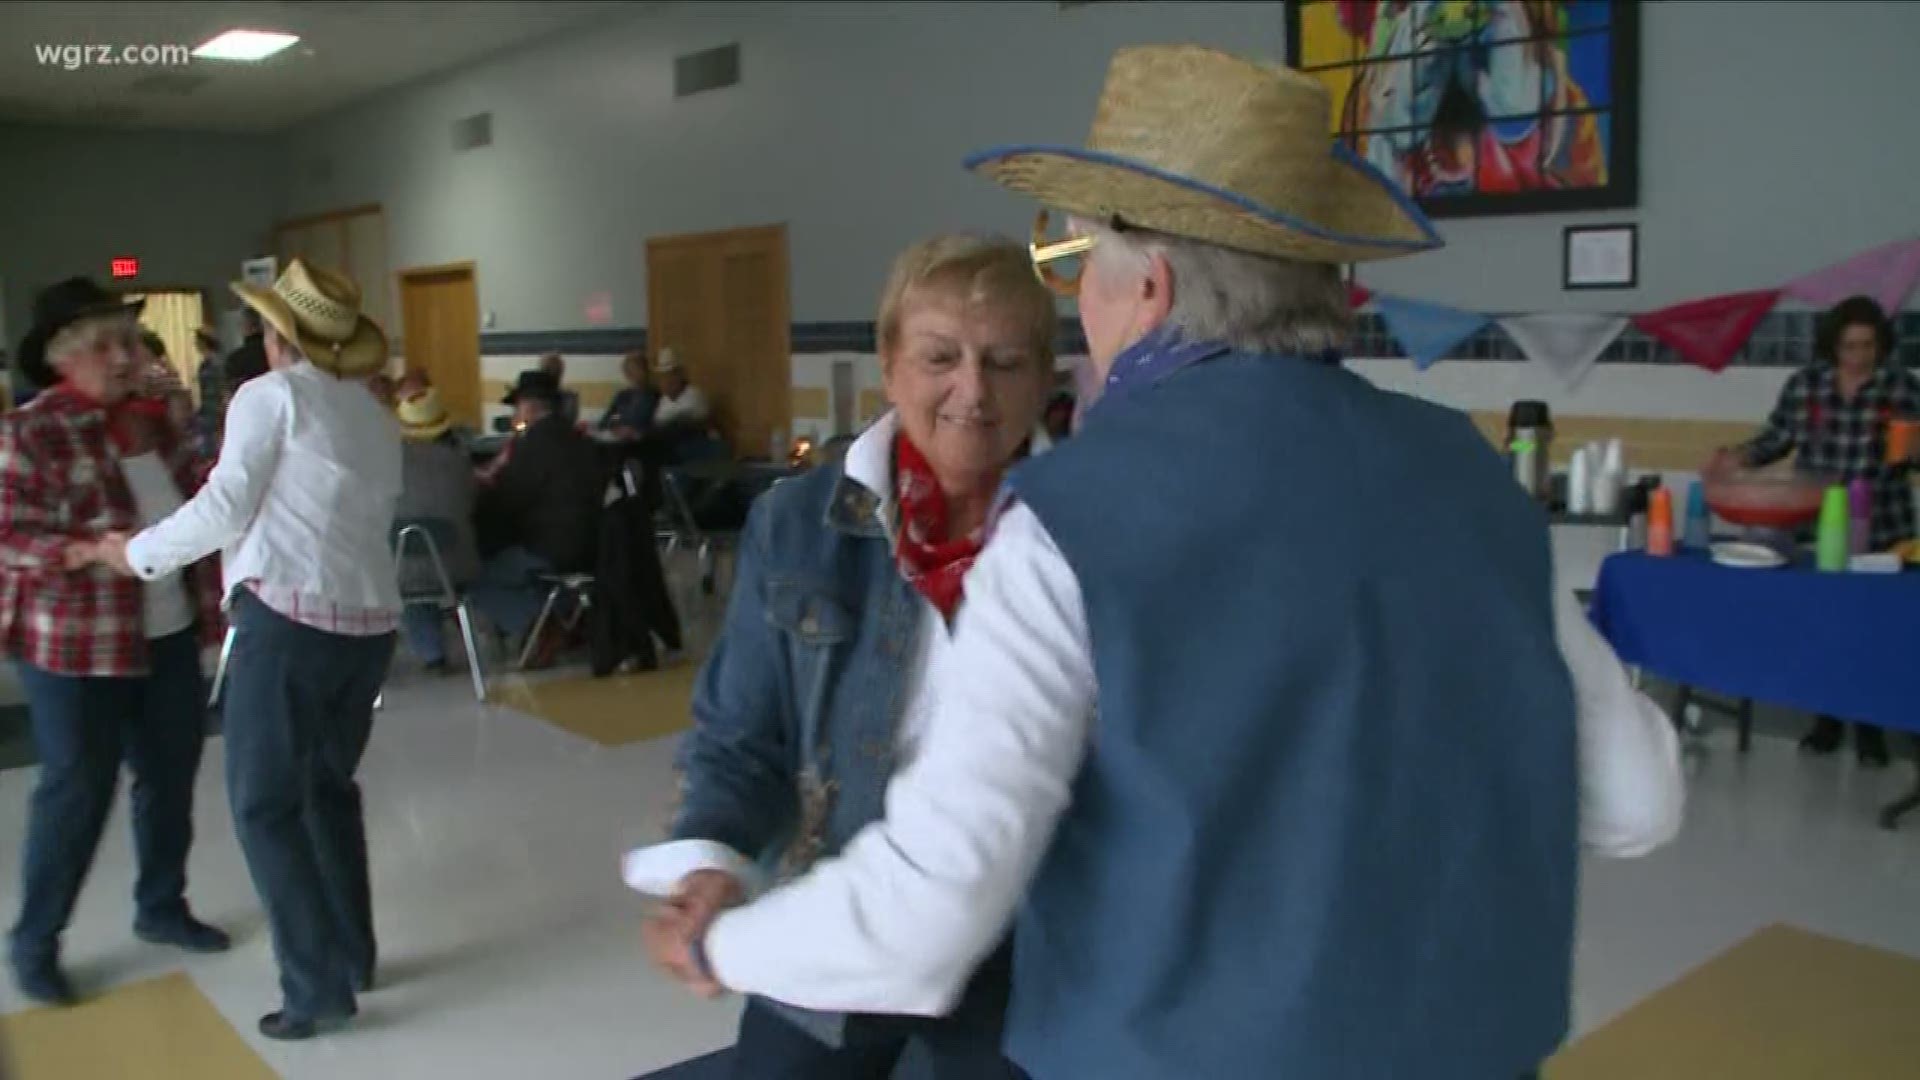 A Senior citizen prom was held today at Alden Highschool to give back to the community.